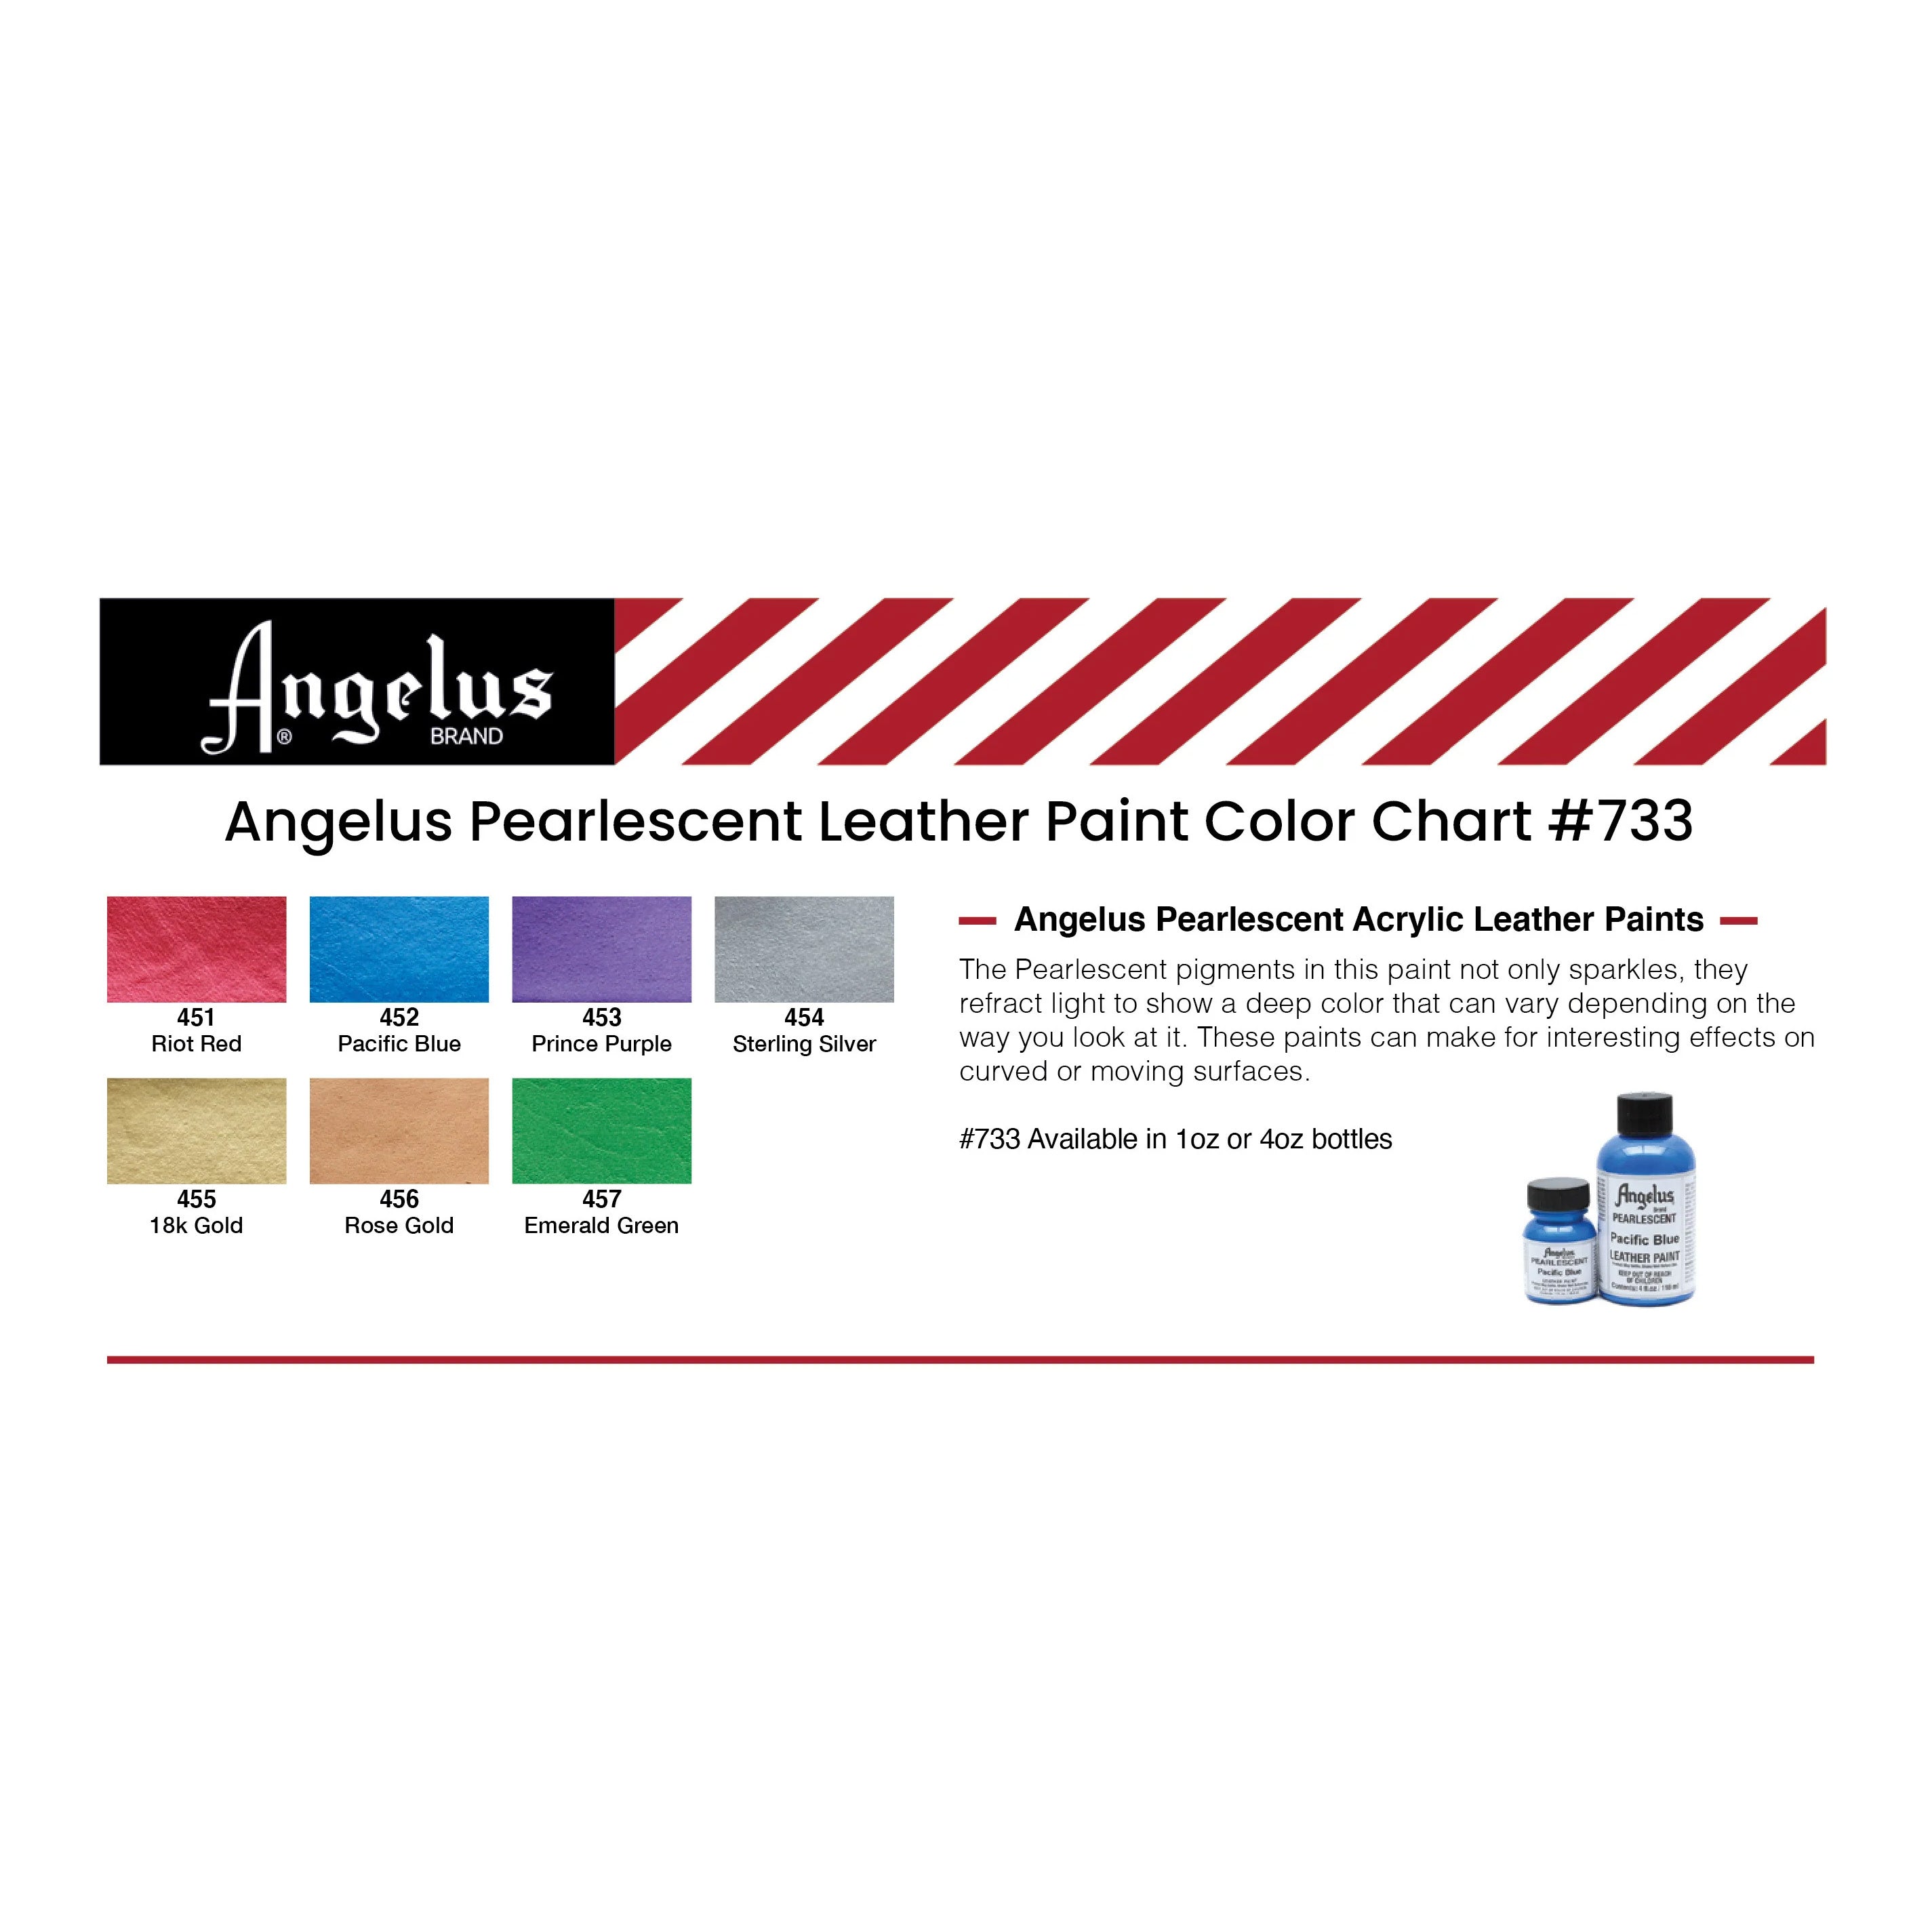 Angelus Pearlescent Paint - Riot Red 